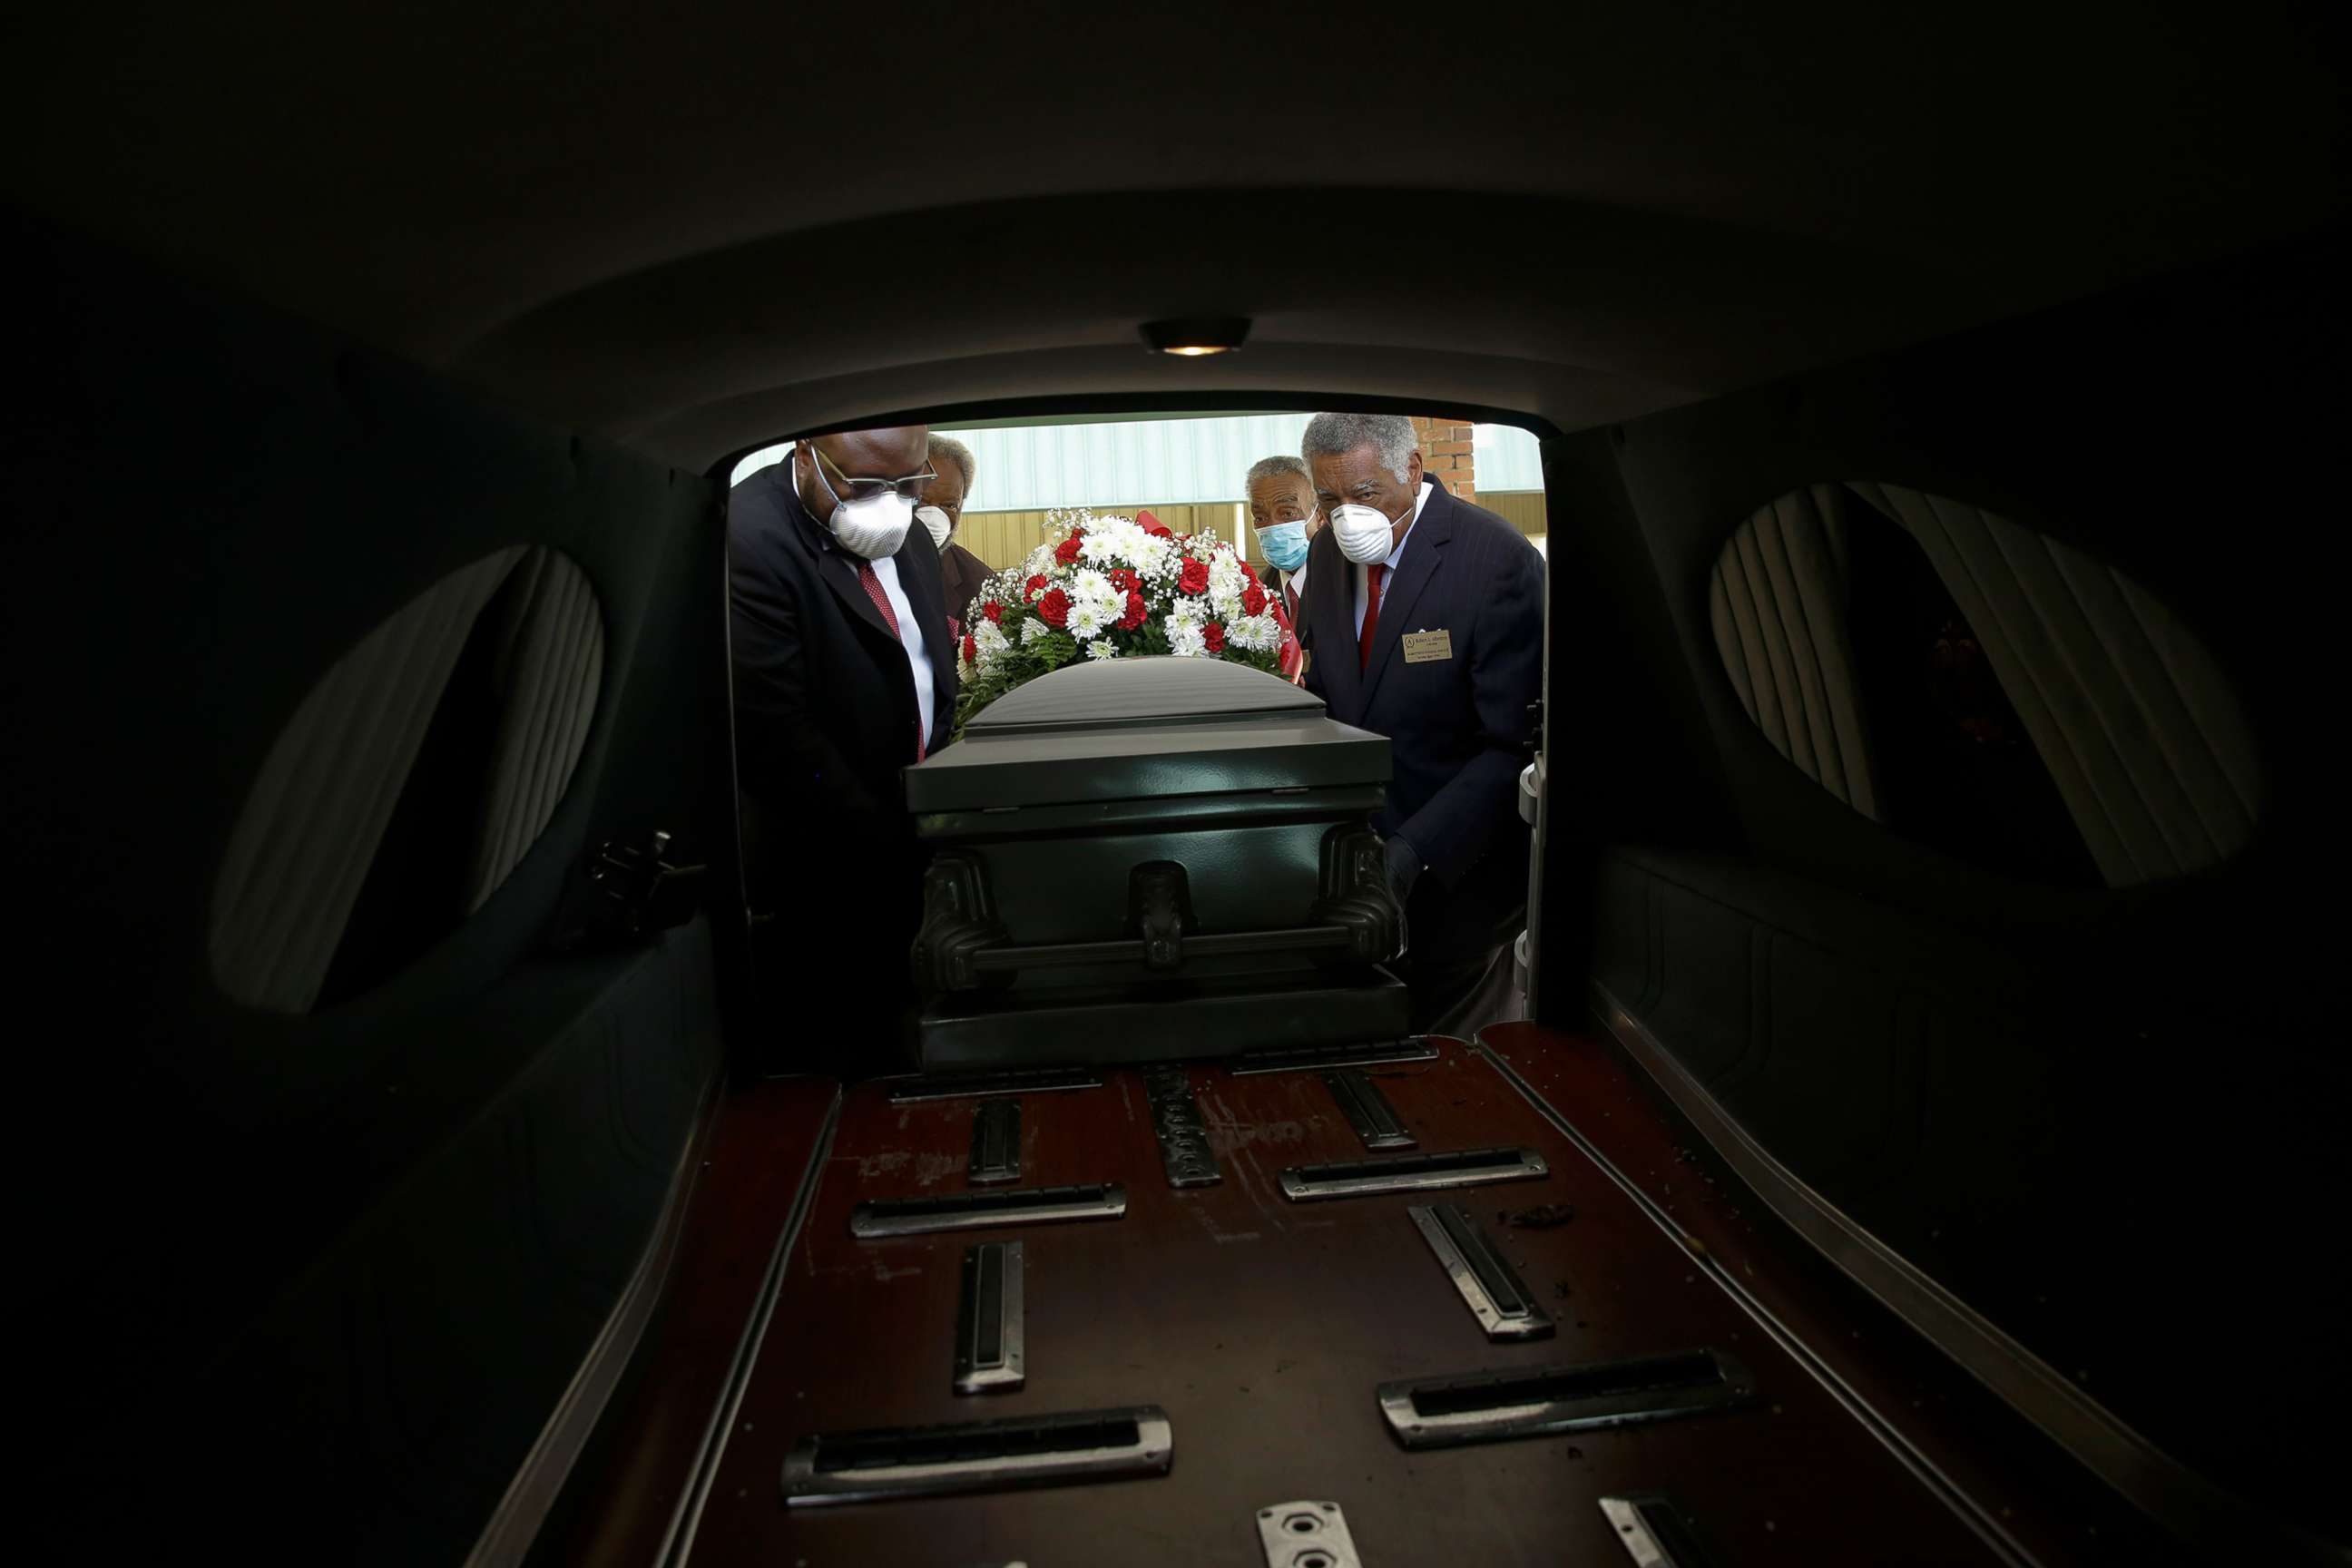 PHOTO: A casket is placed into a hearse, April 18, 2020, in Dawson, Ga., during the coronavirus pandemic.